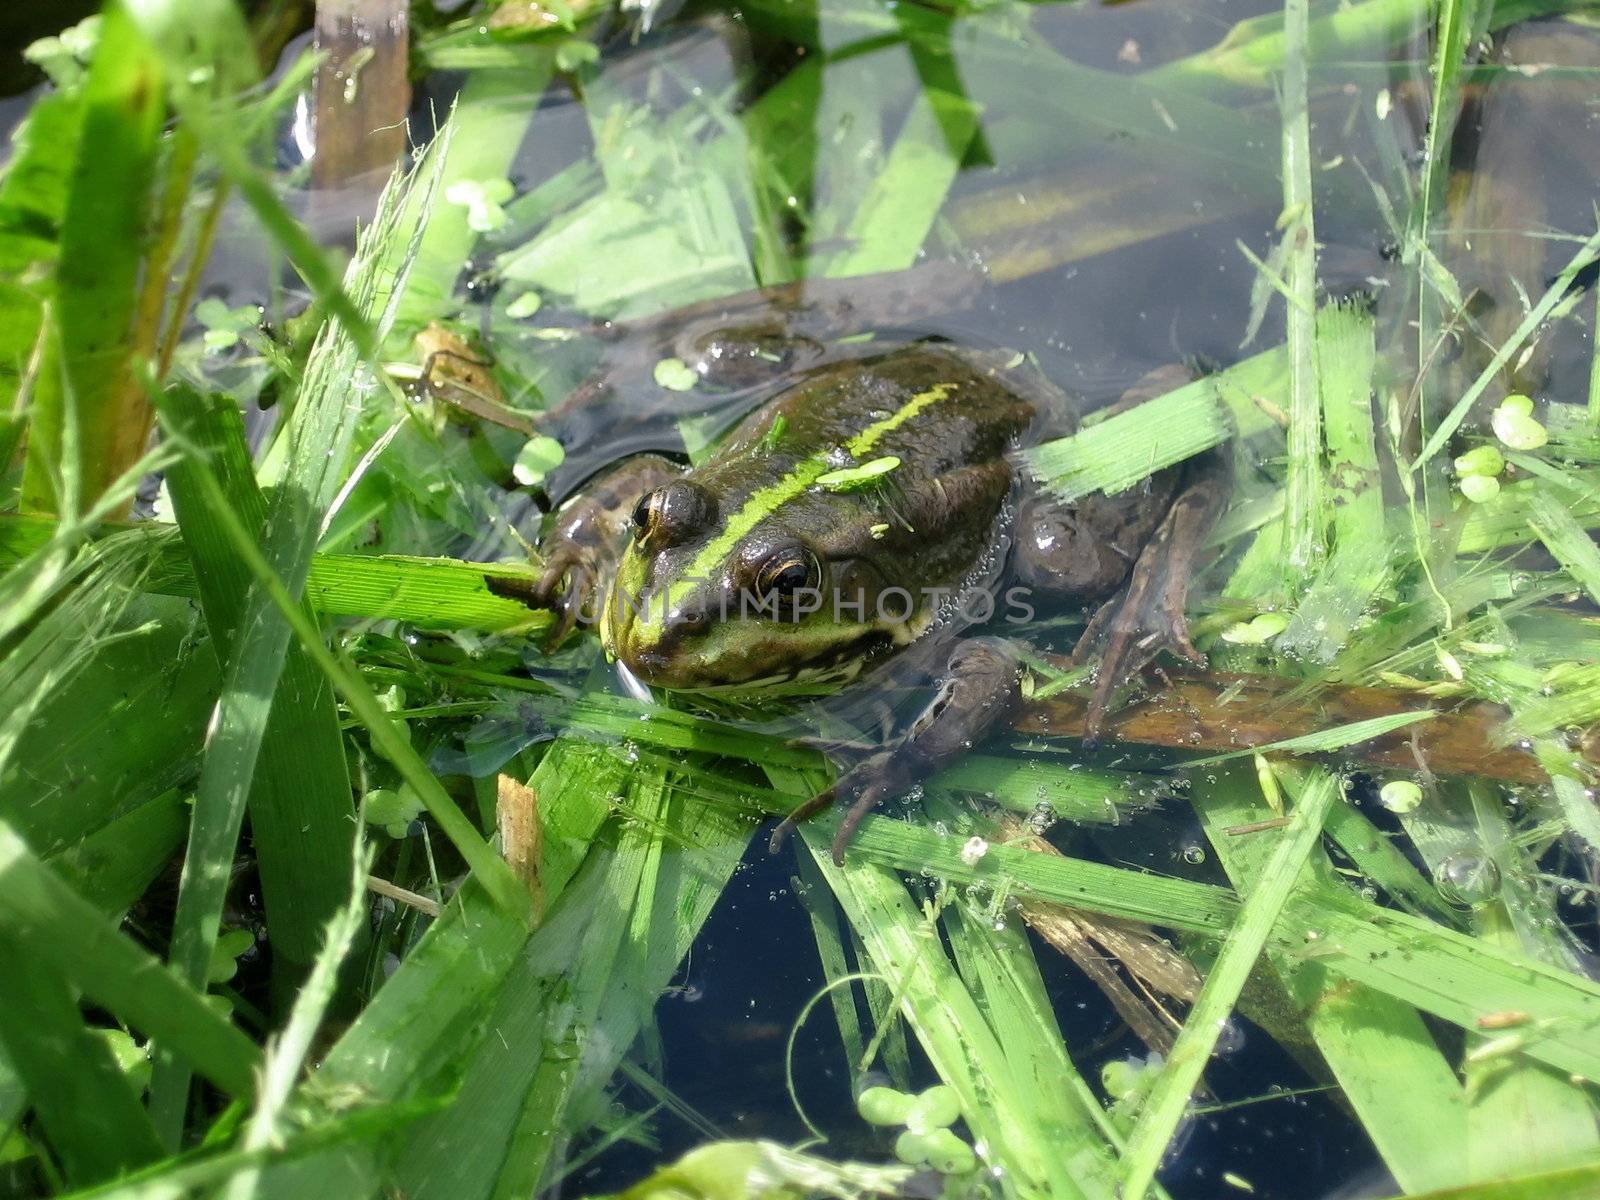 Green striped frog sits in the pond